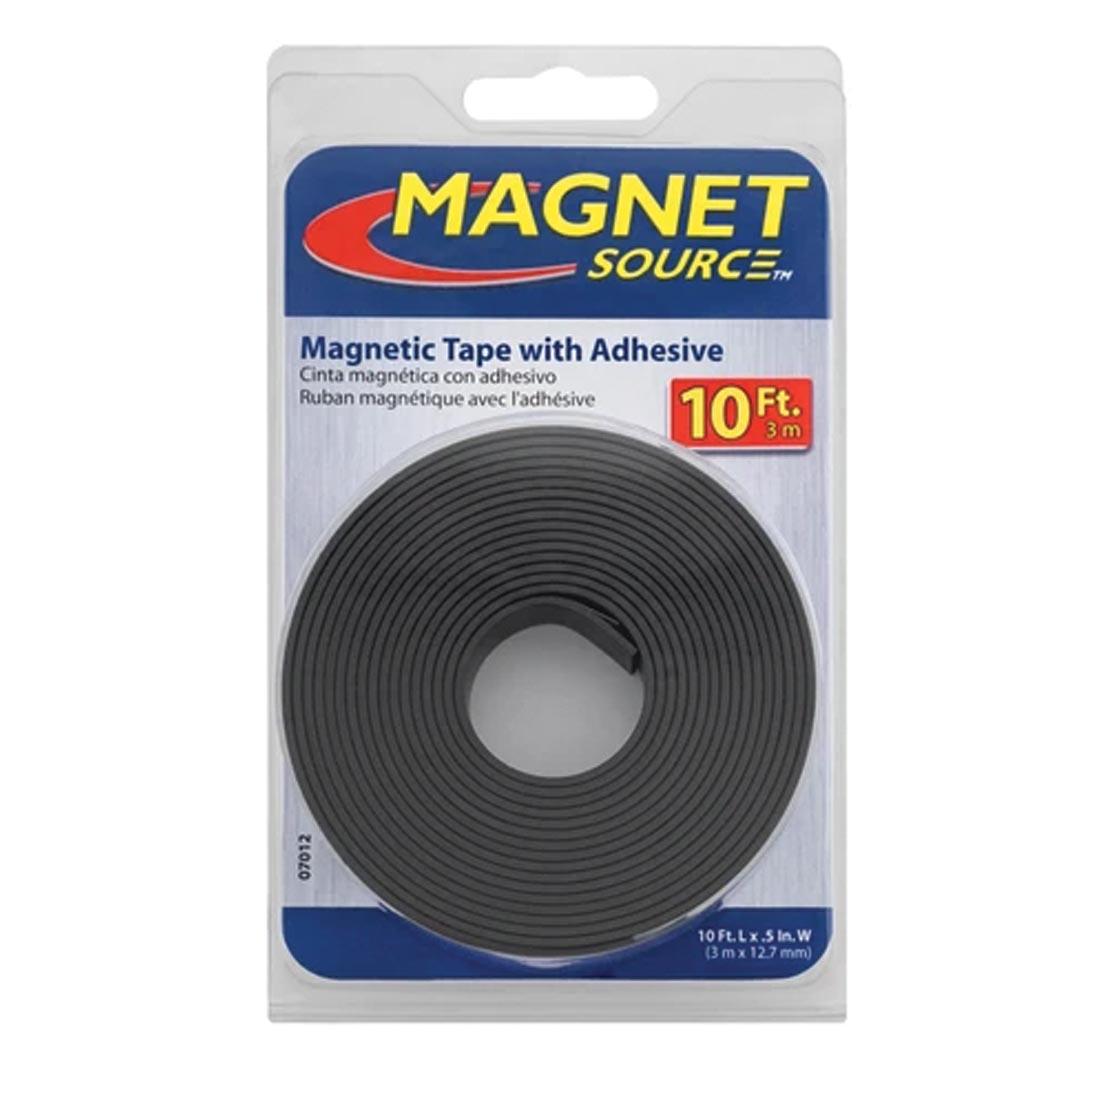 Magnet Source 1/2" by 10 Feet Magnet Tape With Adhesive